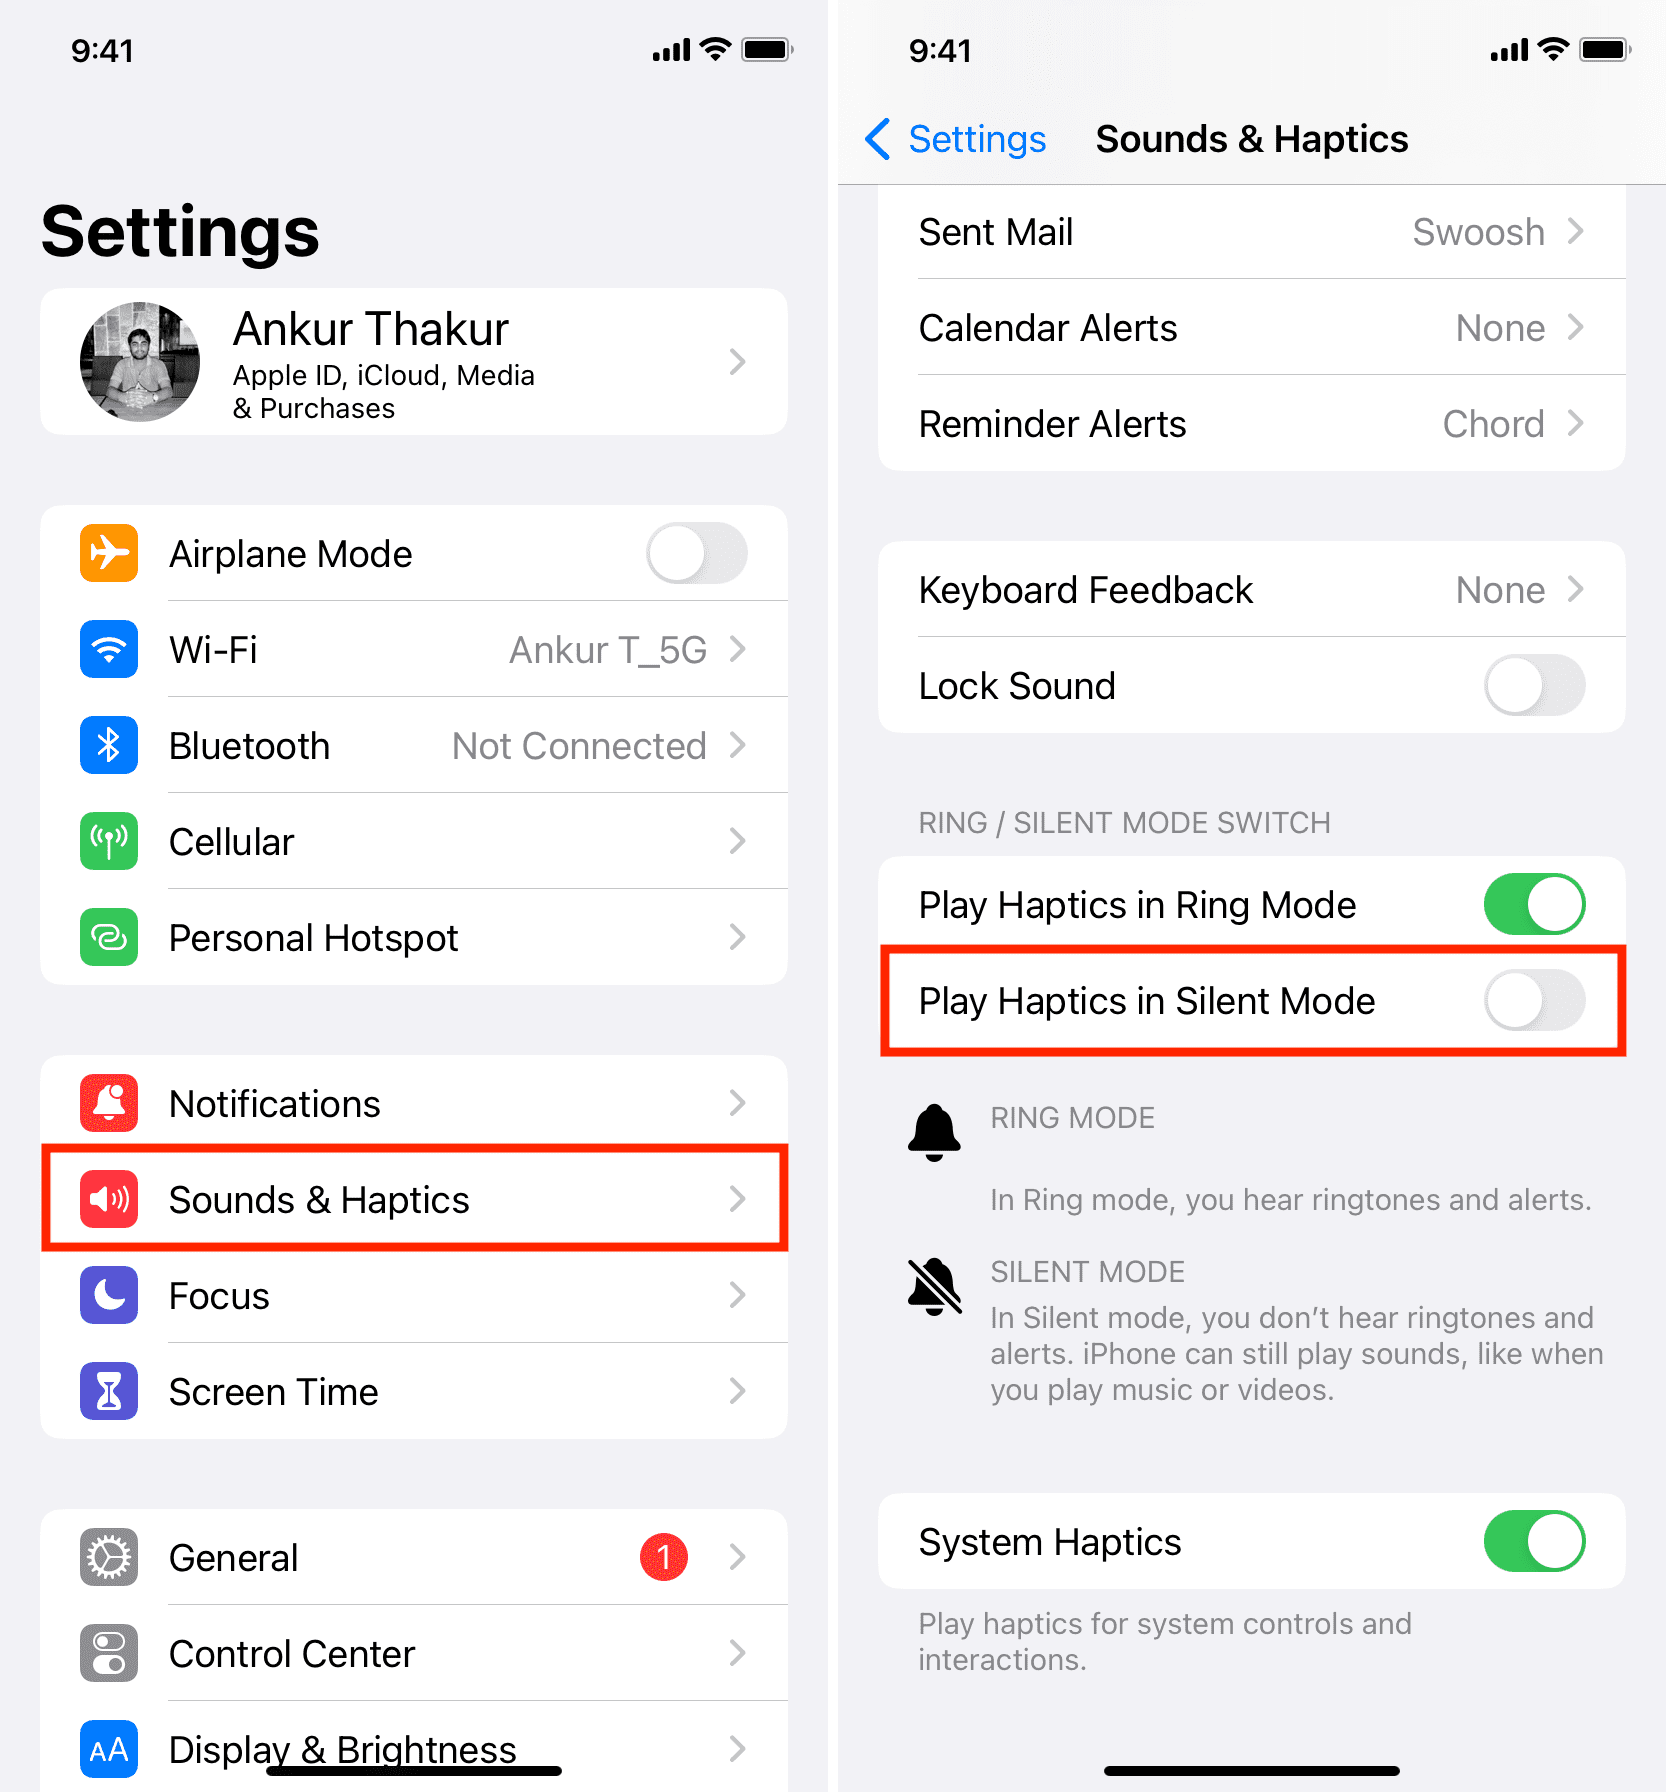 Disable Play Haptics in Silent Mode on iPhone